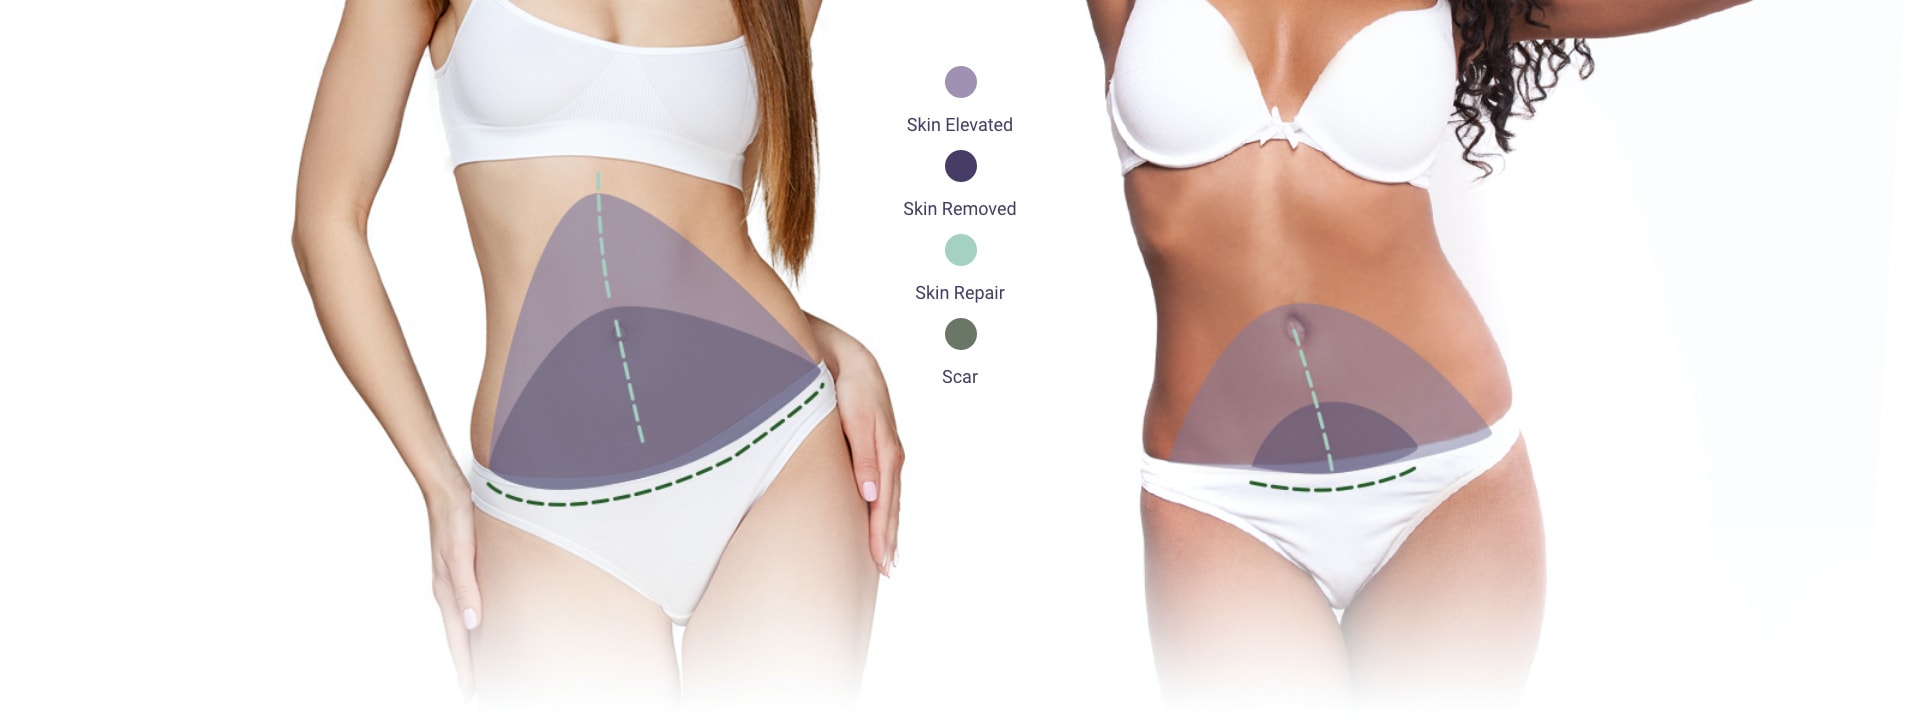 Your Checklist for a Perfect Tummy Tuck - Plastic Surgery